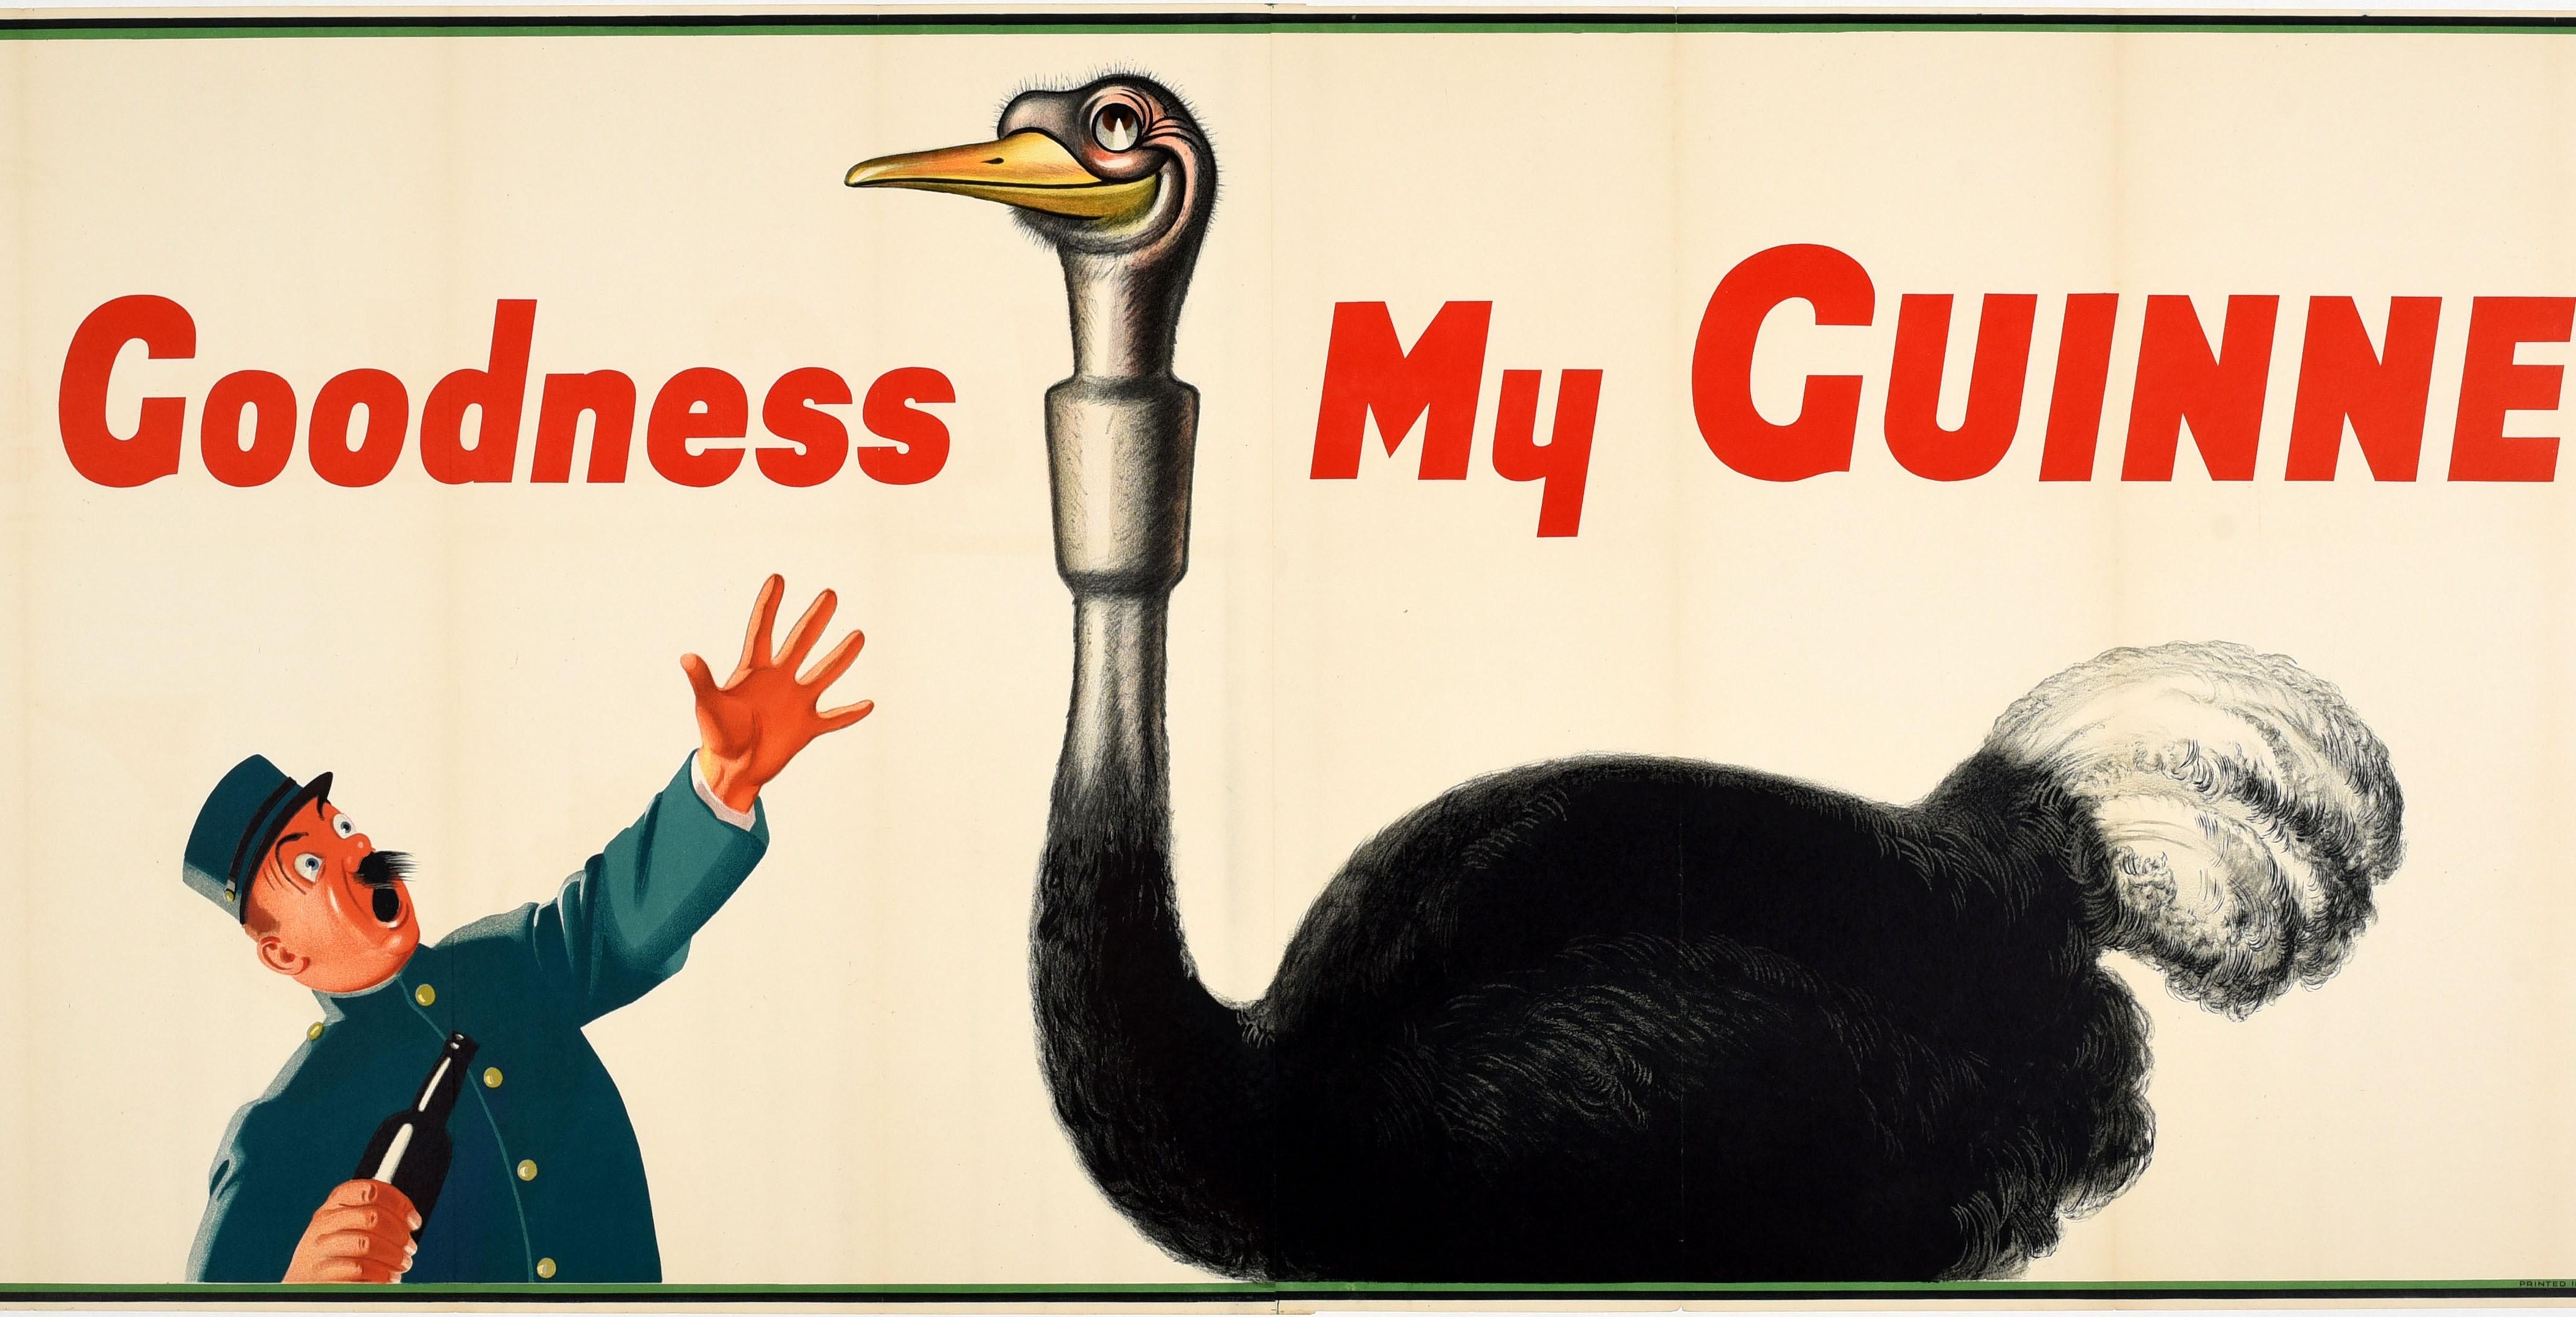 Original Vintage Drink Advertising Poster My Goodness My Guinness Ostrich Design - Print by John Gilroy